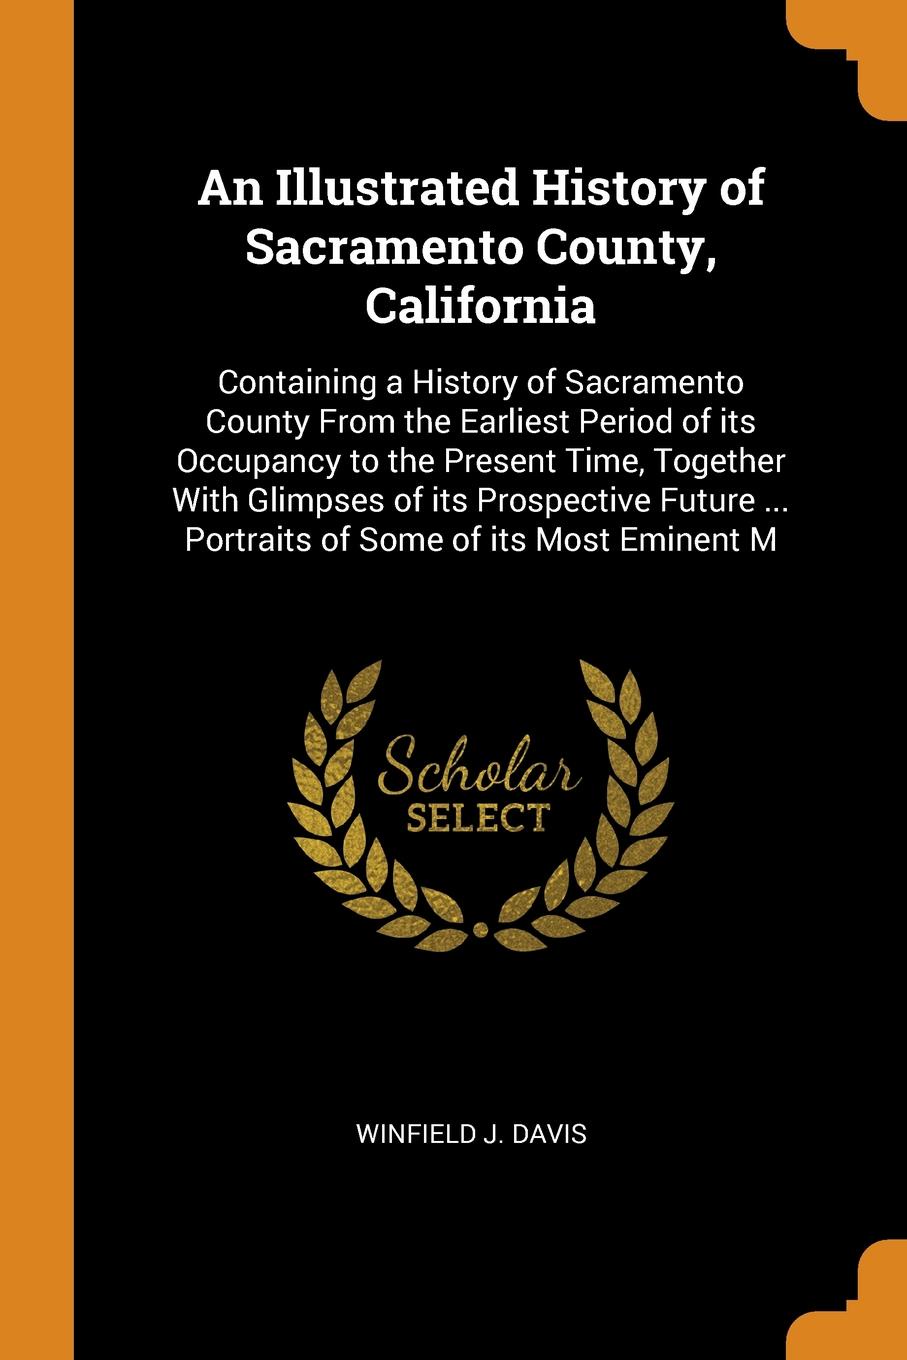 An Illustrated History of Sacramento County, California. Containing a History of Sacramento County From the Earliest Period of its Occupancy to the Present Time, Together With Glimpses of its Prospective Future ... Portraits of Some of its Most Em...